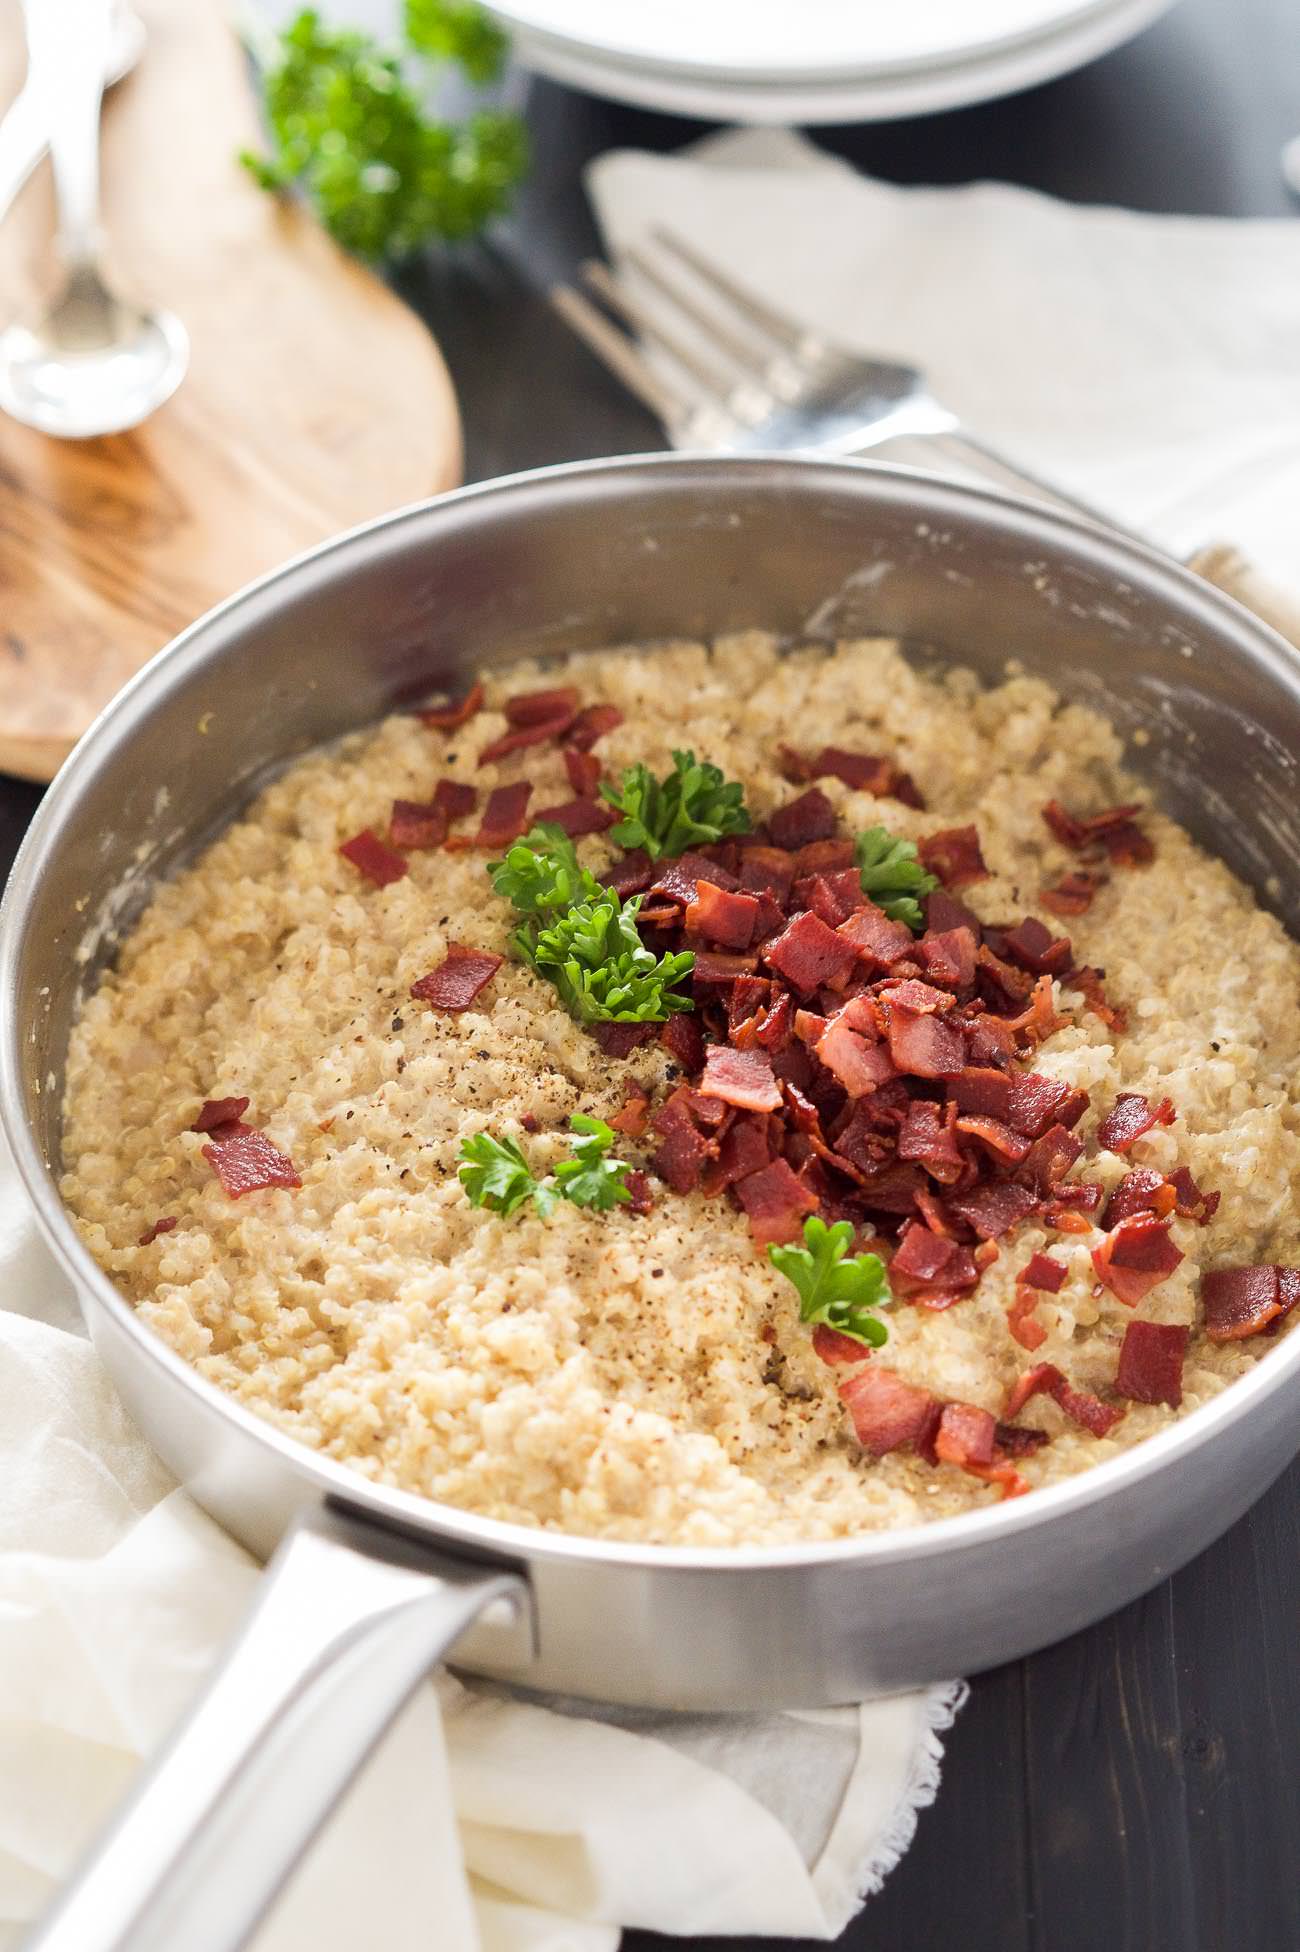 Goat Cheese & Bacon Quinoa Risotto is a shortcut version of the classic risotto! Creamy goat cheese, bacon and quinoa come together in under 30 minutes and requires minimal hands on time; making this the perfect healthy, side dish!